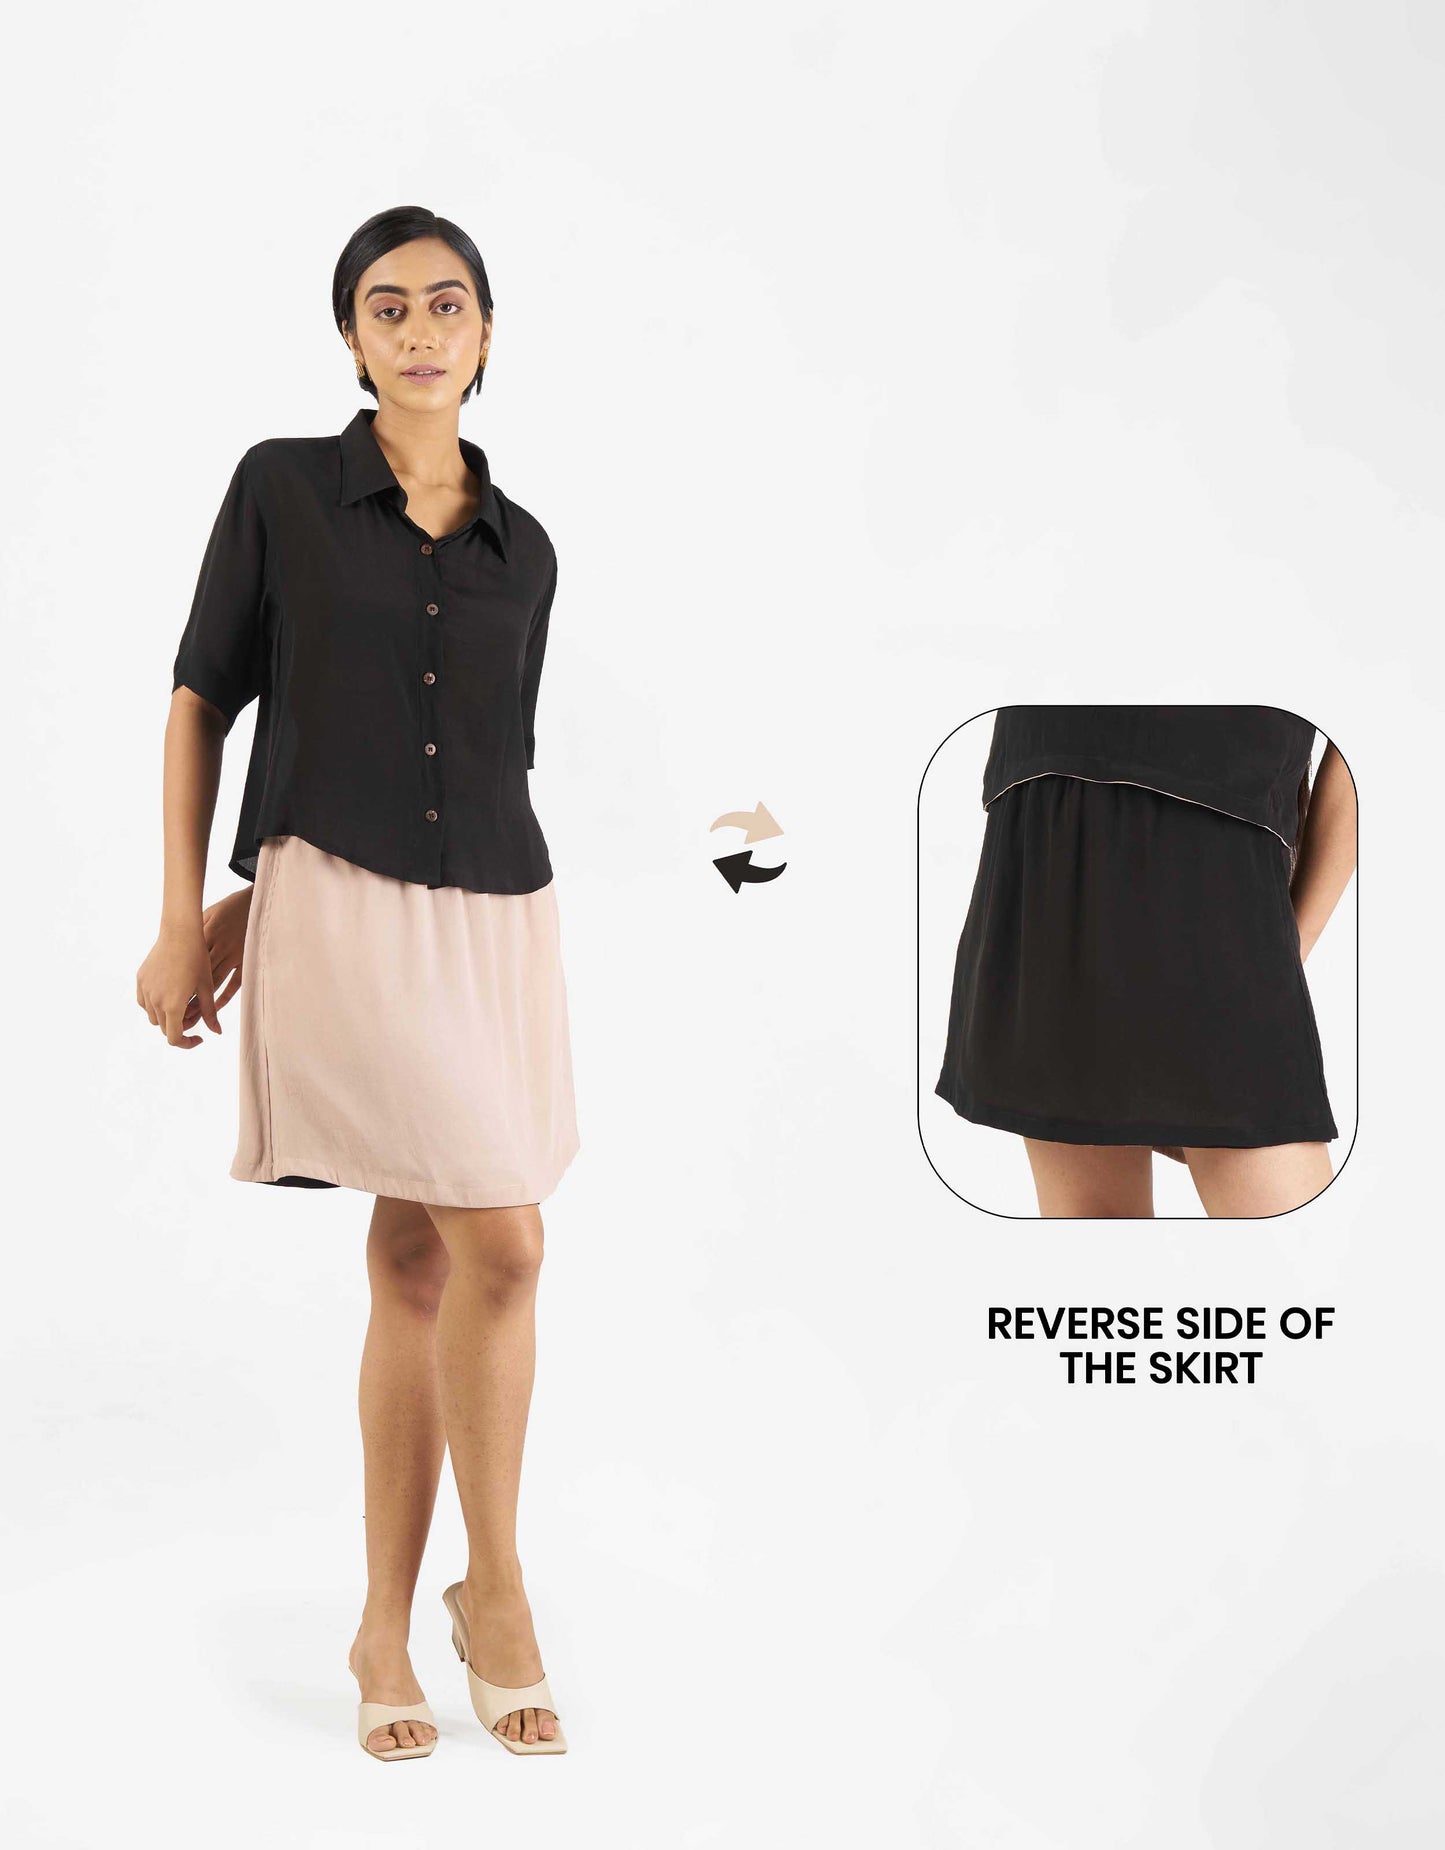 Front view of Hueloom's Reversible Skirt in champagne with black reverse side.